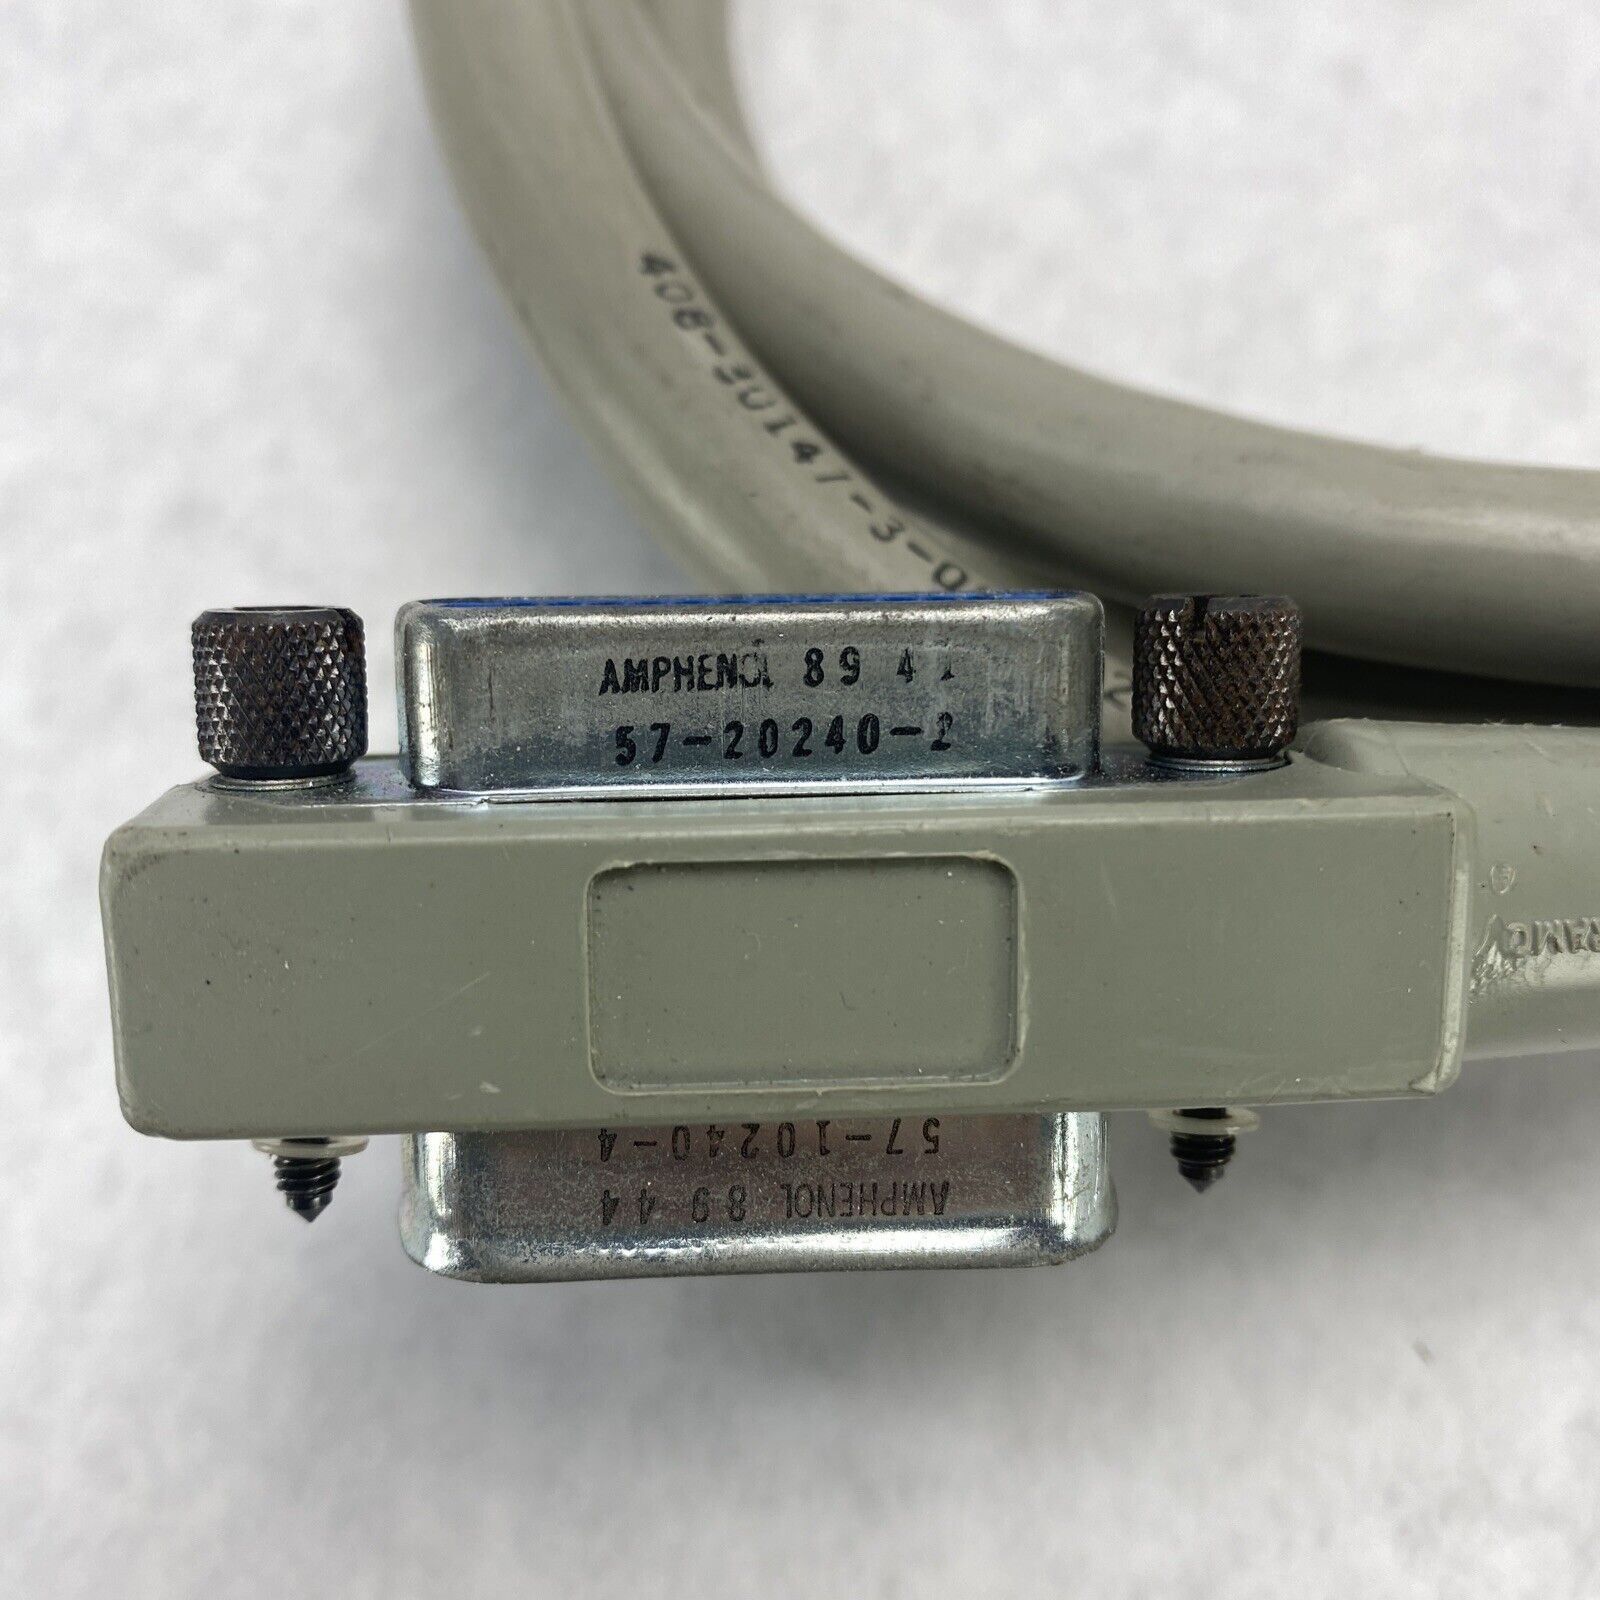 GPIB IEEE-488 Cable 1 Meter Amphenol Connectors UNTESTED